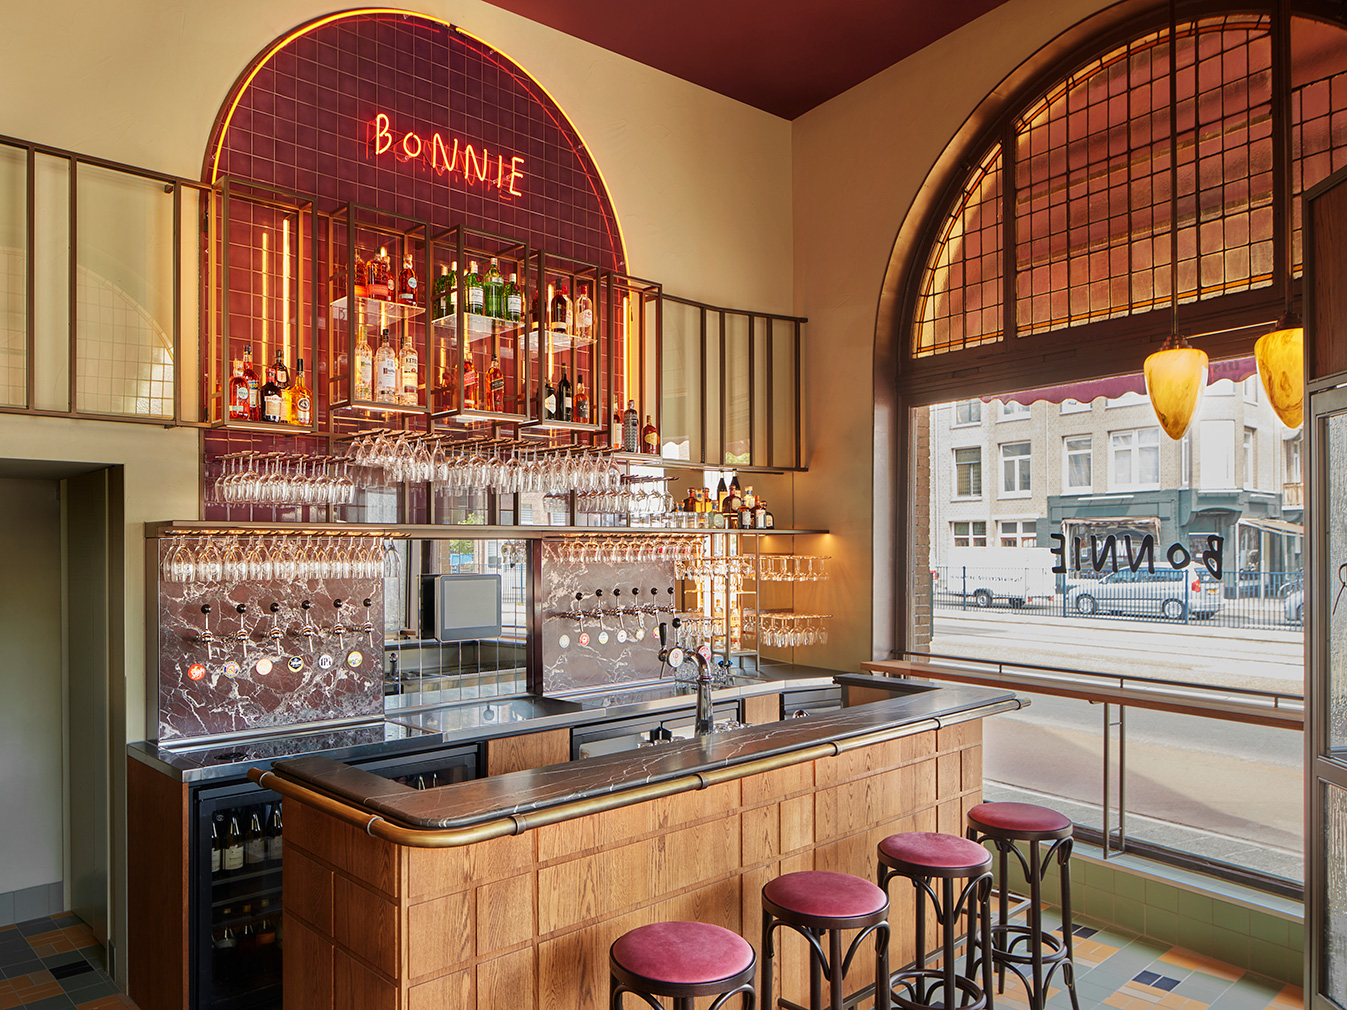 Burgundy tones and tiles set the scene at Amsterdam bistro Bonnie